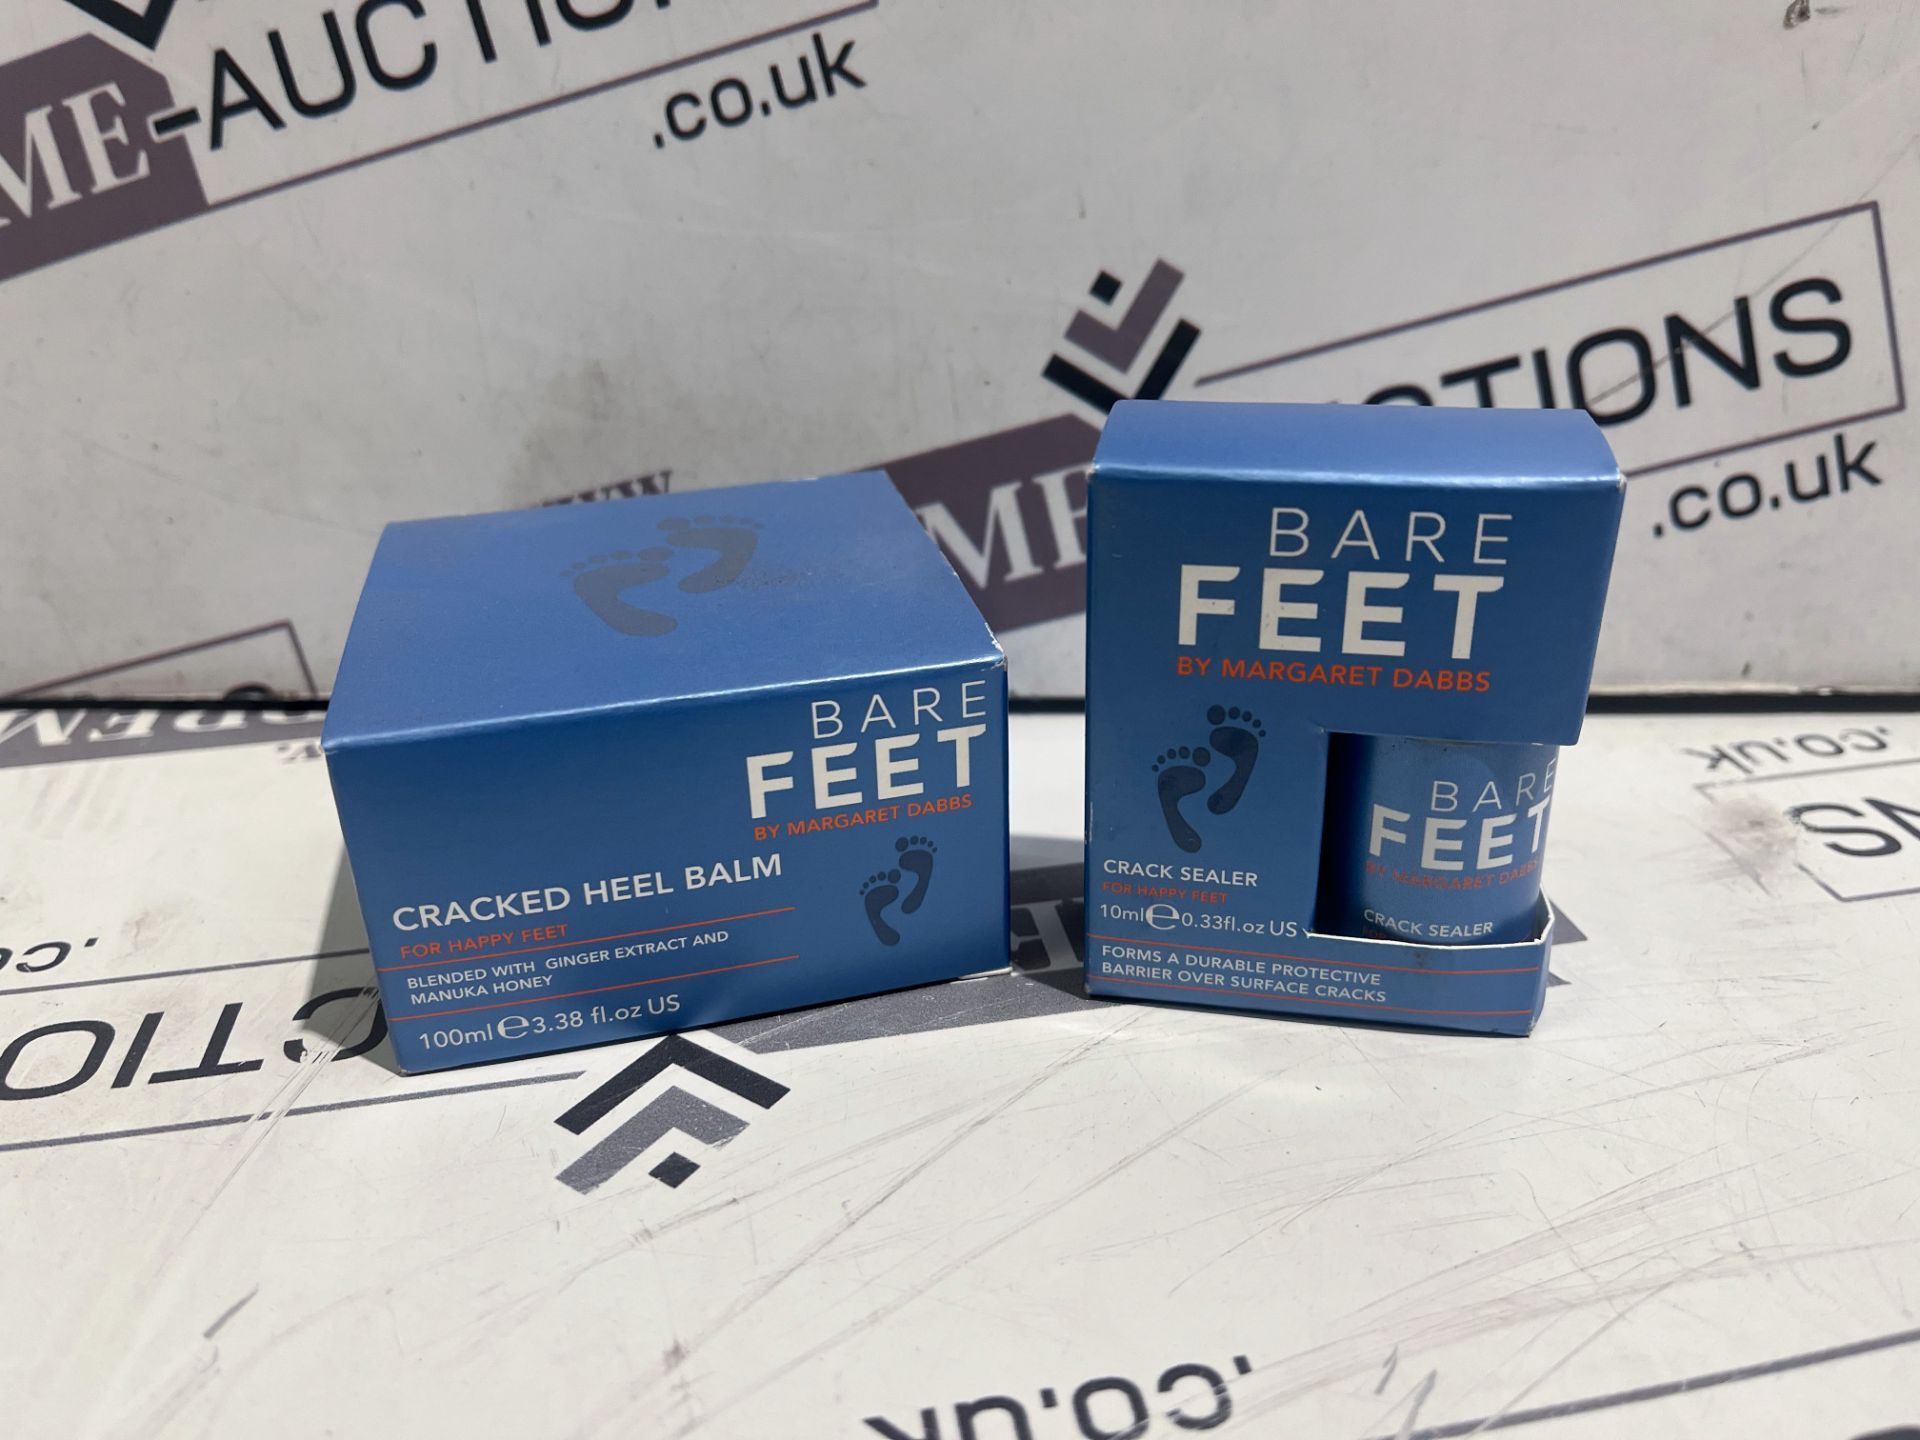 12 X BRAND NEW BARE FEET TWIN PACKS INCLUDING 10ML CRACK SEALER AND 100ML CRACKED HEEL BALM RRP £